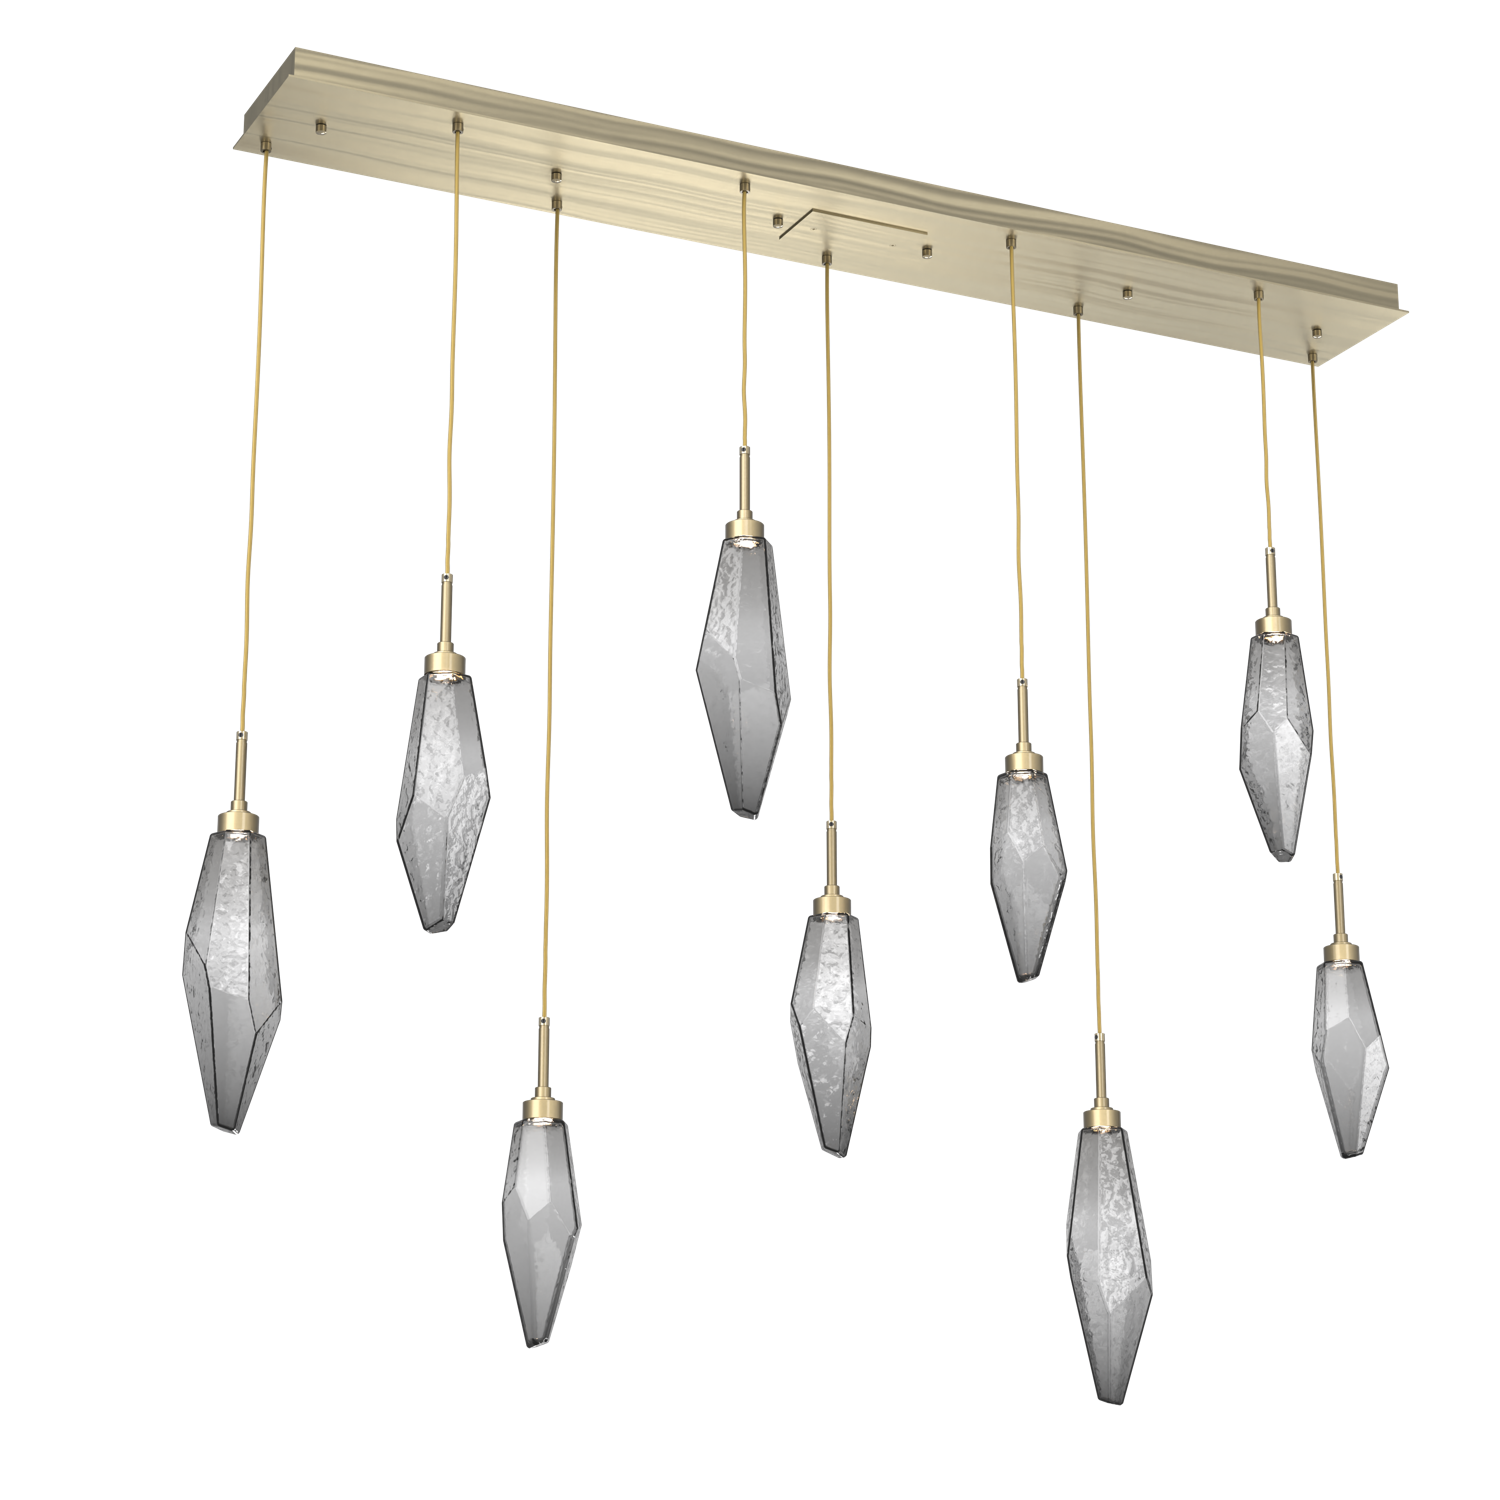 PLB0050-09-HB-CS-Hammerton-Studio-Rock-Crystal-9-light-linear-pendant-chandelier-with-heritage-brass-finish-and-chilled-smoke-glass-shades-and-LED-lamping